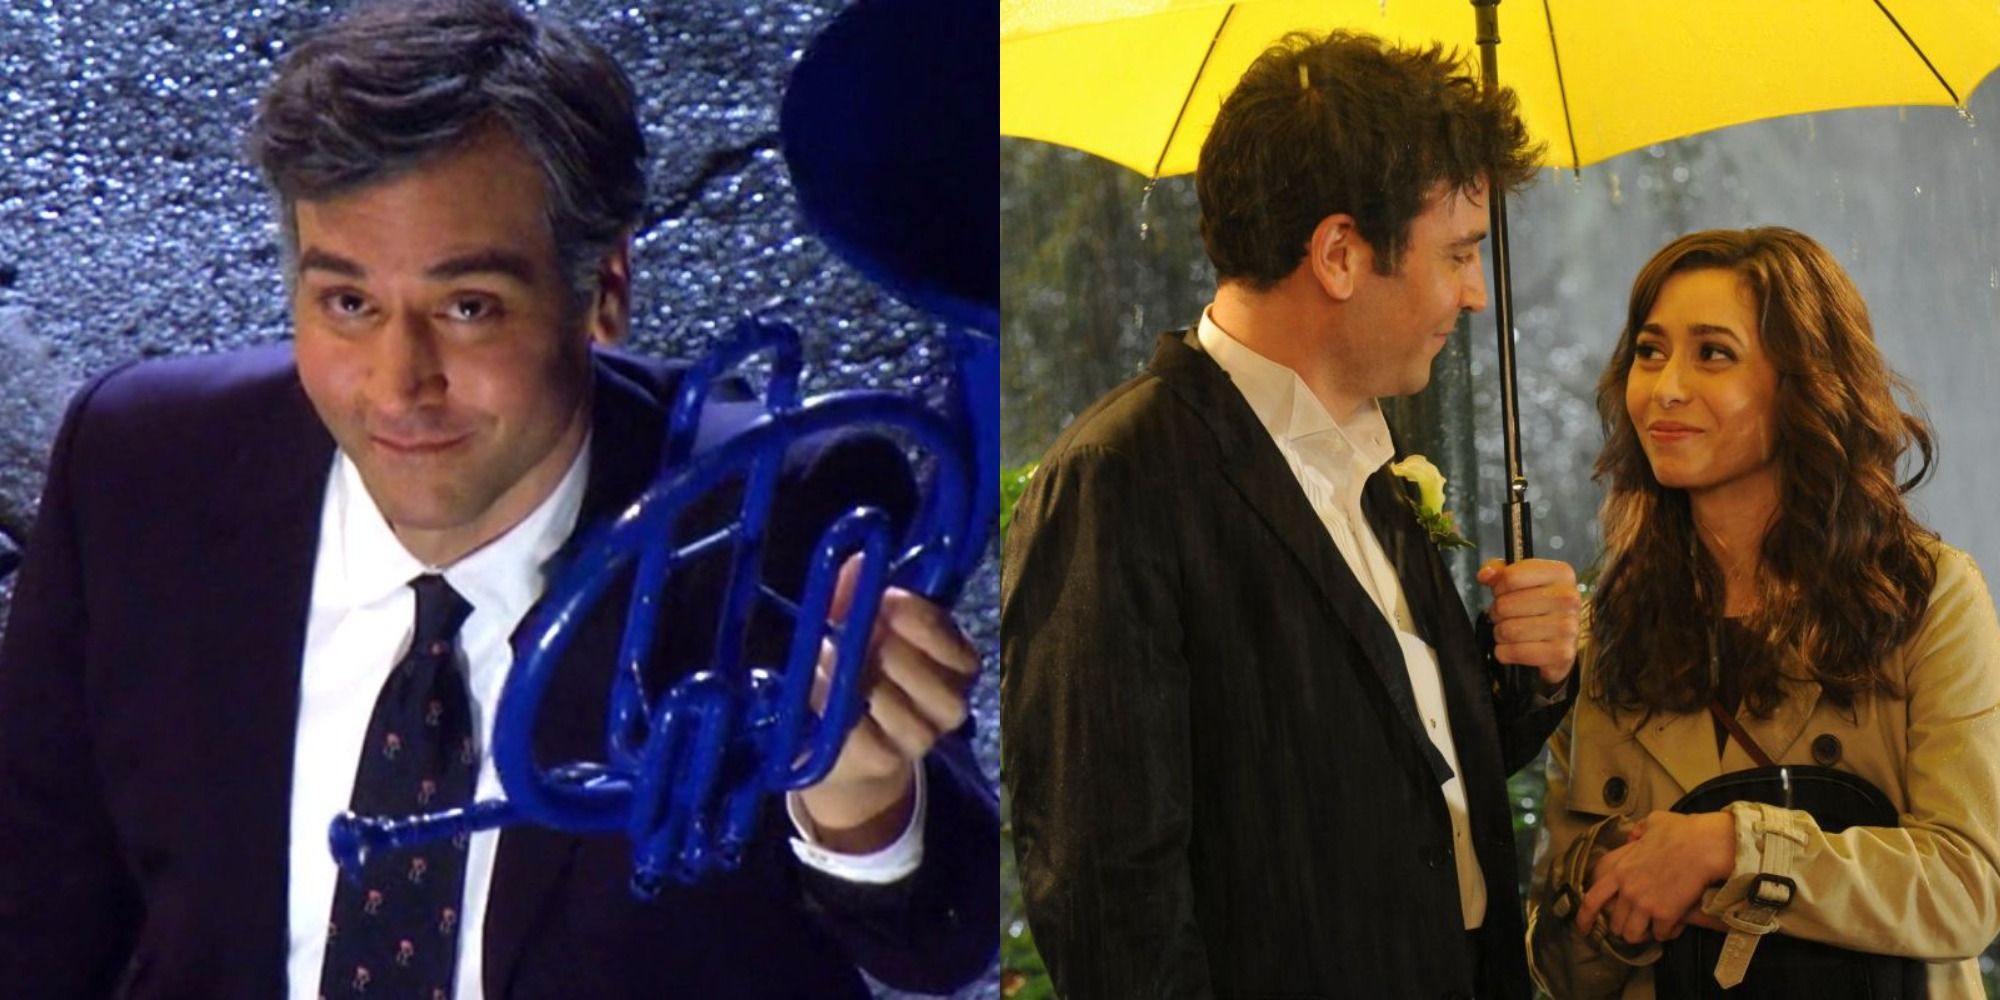 Split image of Ted Mosby holding up the blue french horn, and him standing under the yellow umbrella with Tracy